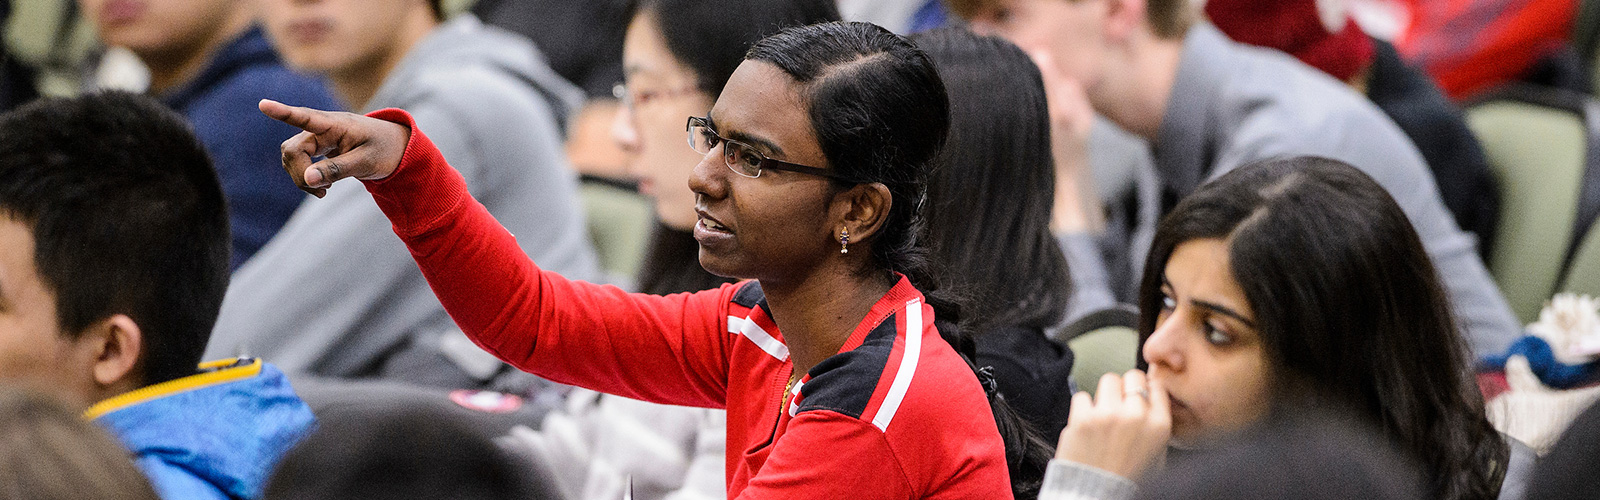 A student responds to a question during a Comp Sci 537 Intro to Operating Systems class at UW–Madison.